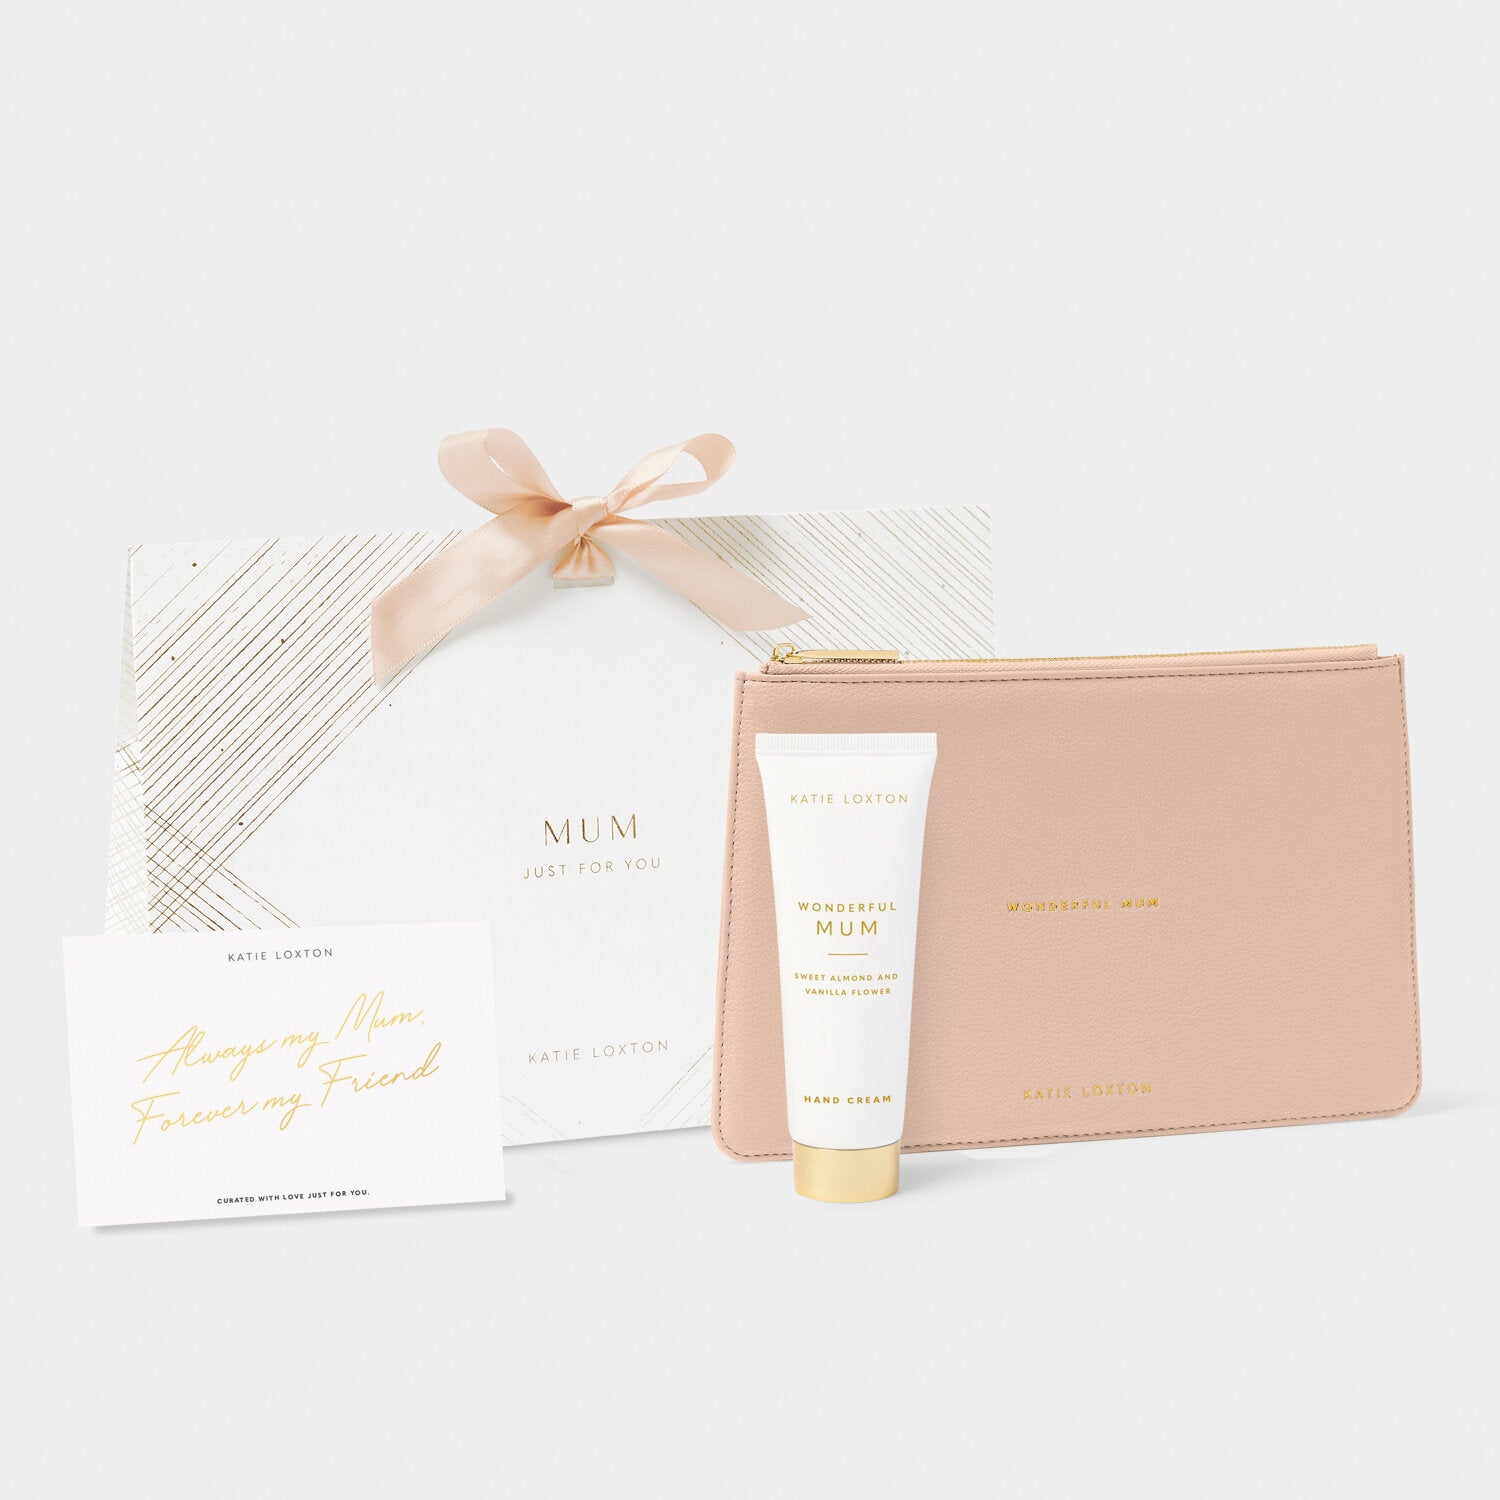 Pouch And Hand Cream Gift Set - Mum - Katie Loxton